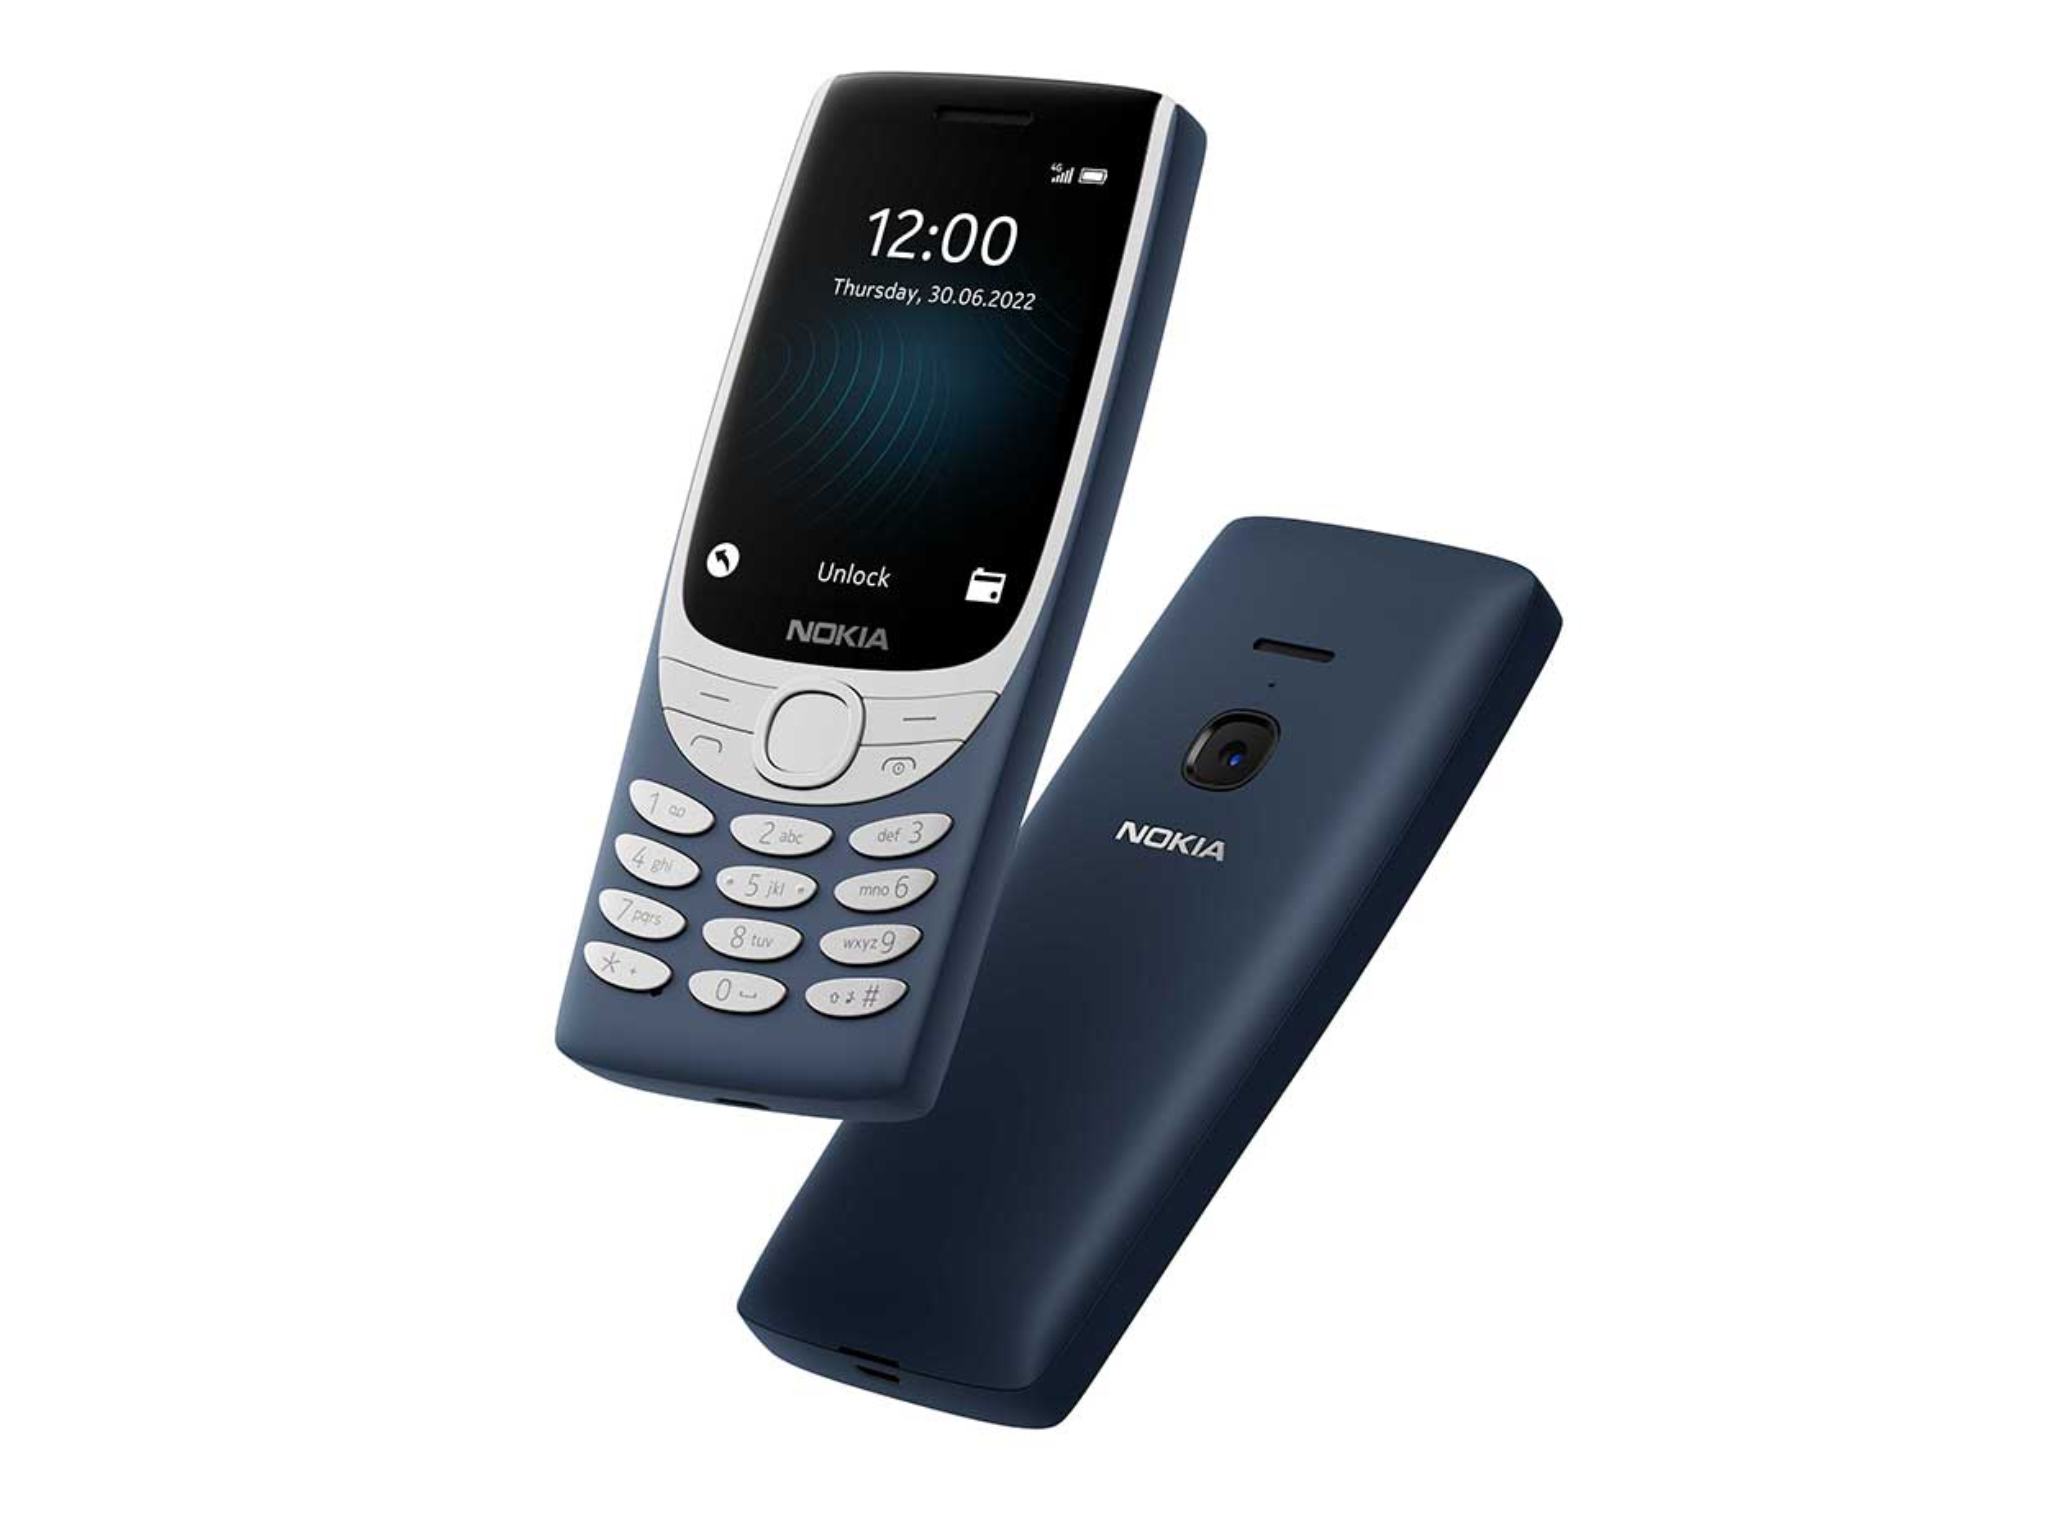 Nokia 8210 4G review: A good feature phone with mix of old and new features